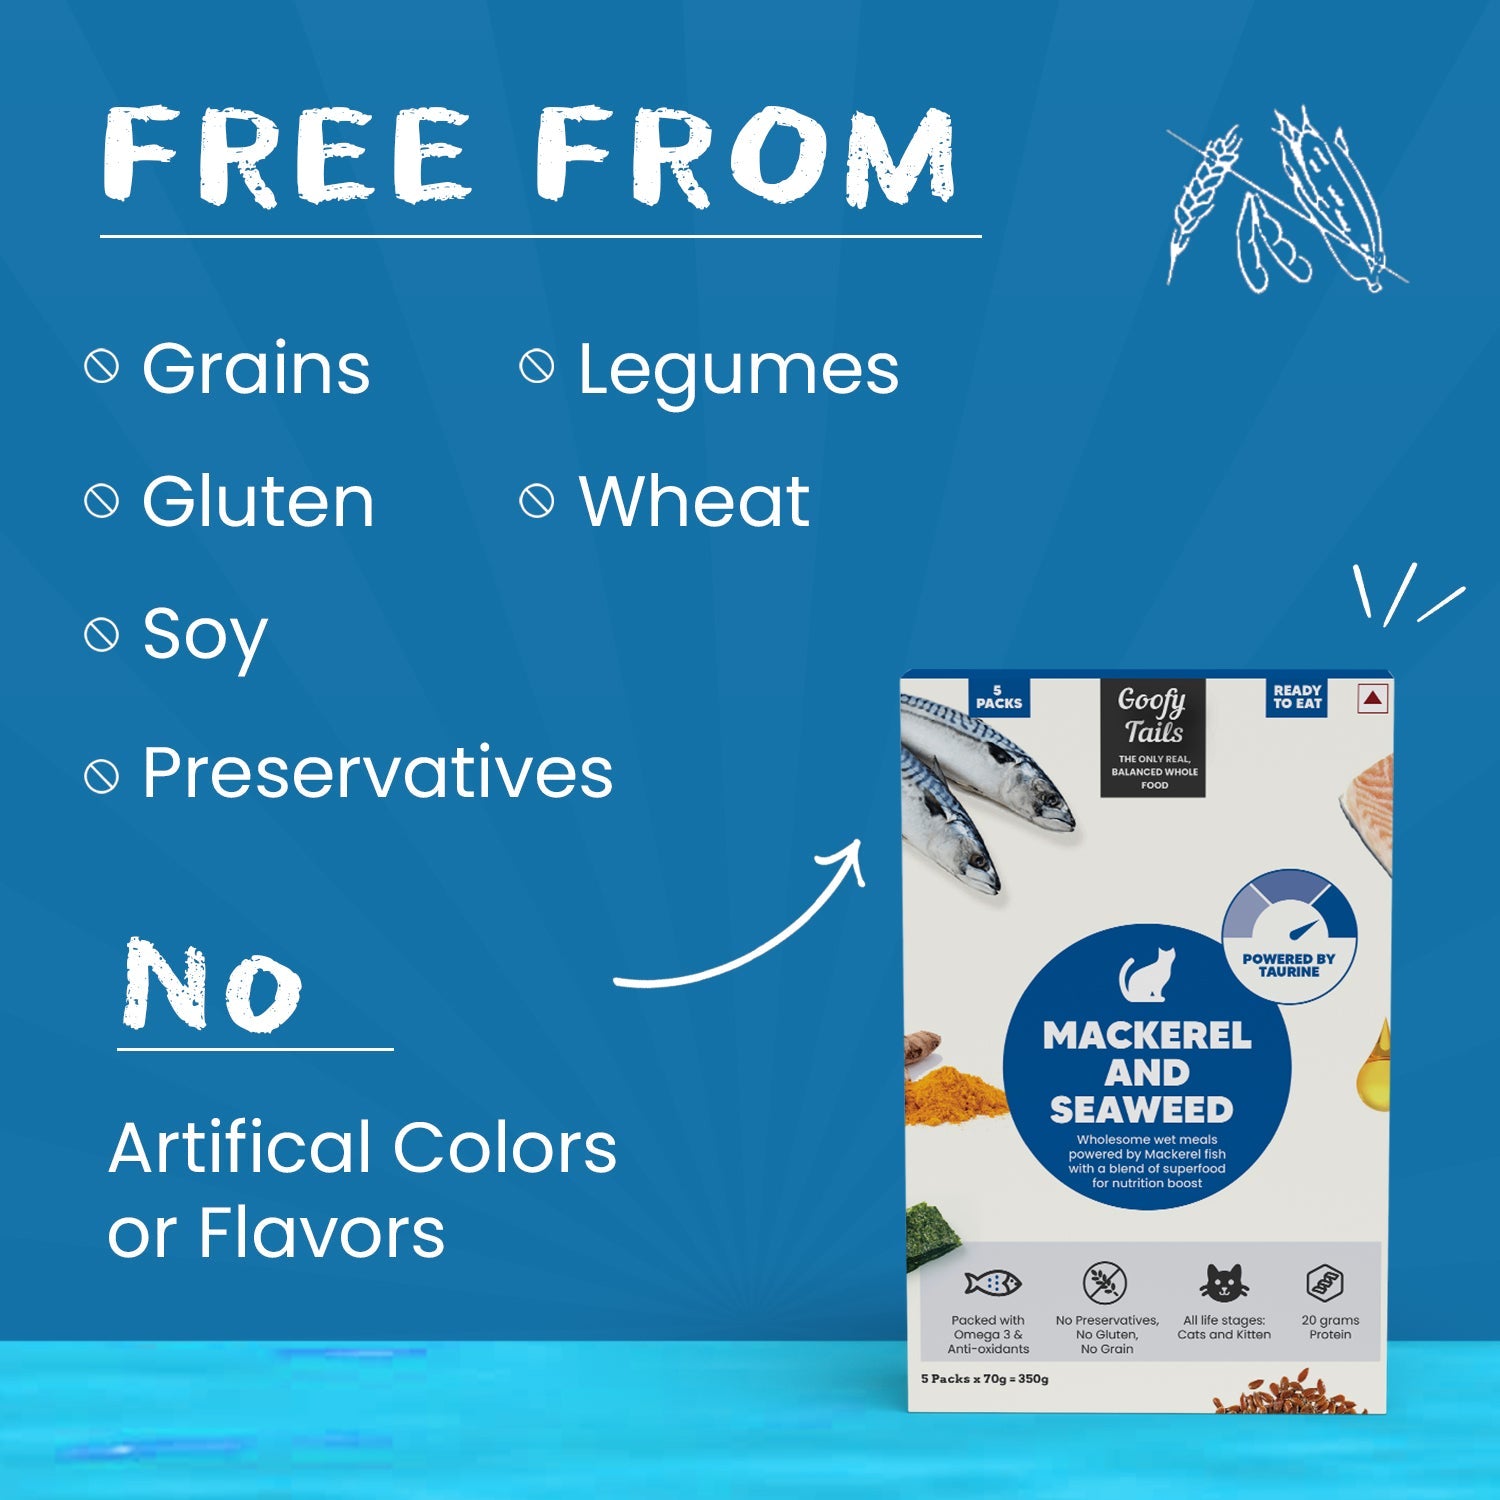 How Goofy tails Cat Food gravy free from grain, gluten, legumes, soy, wheat, and preservative